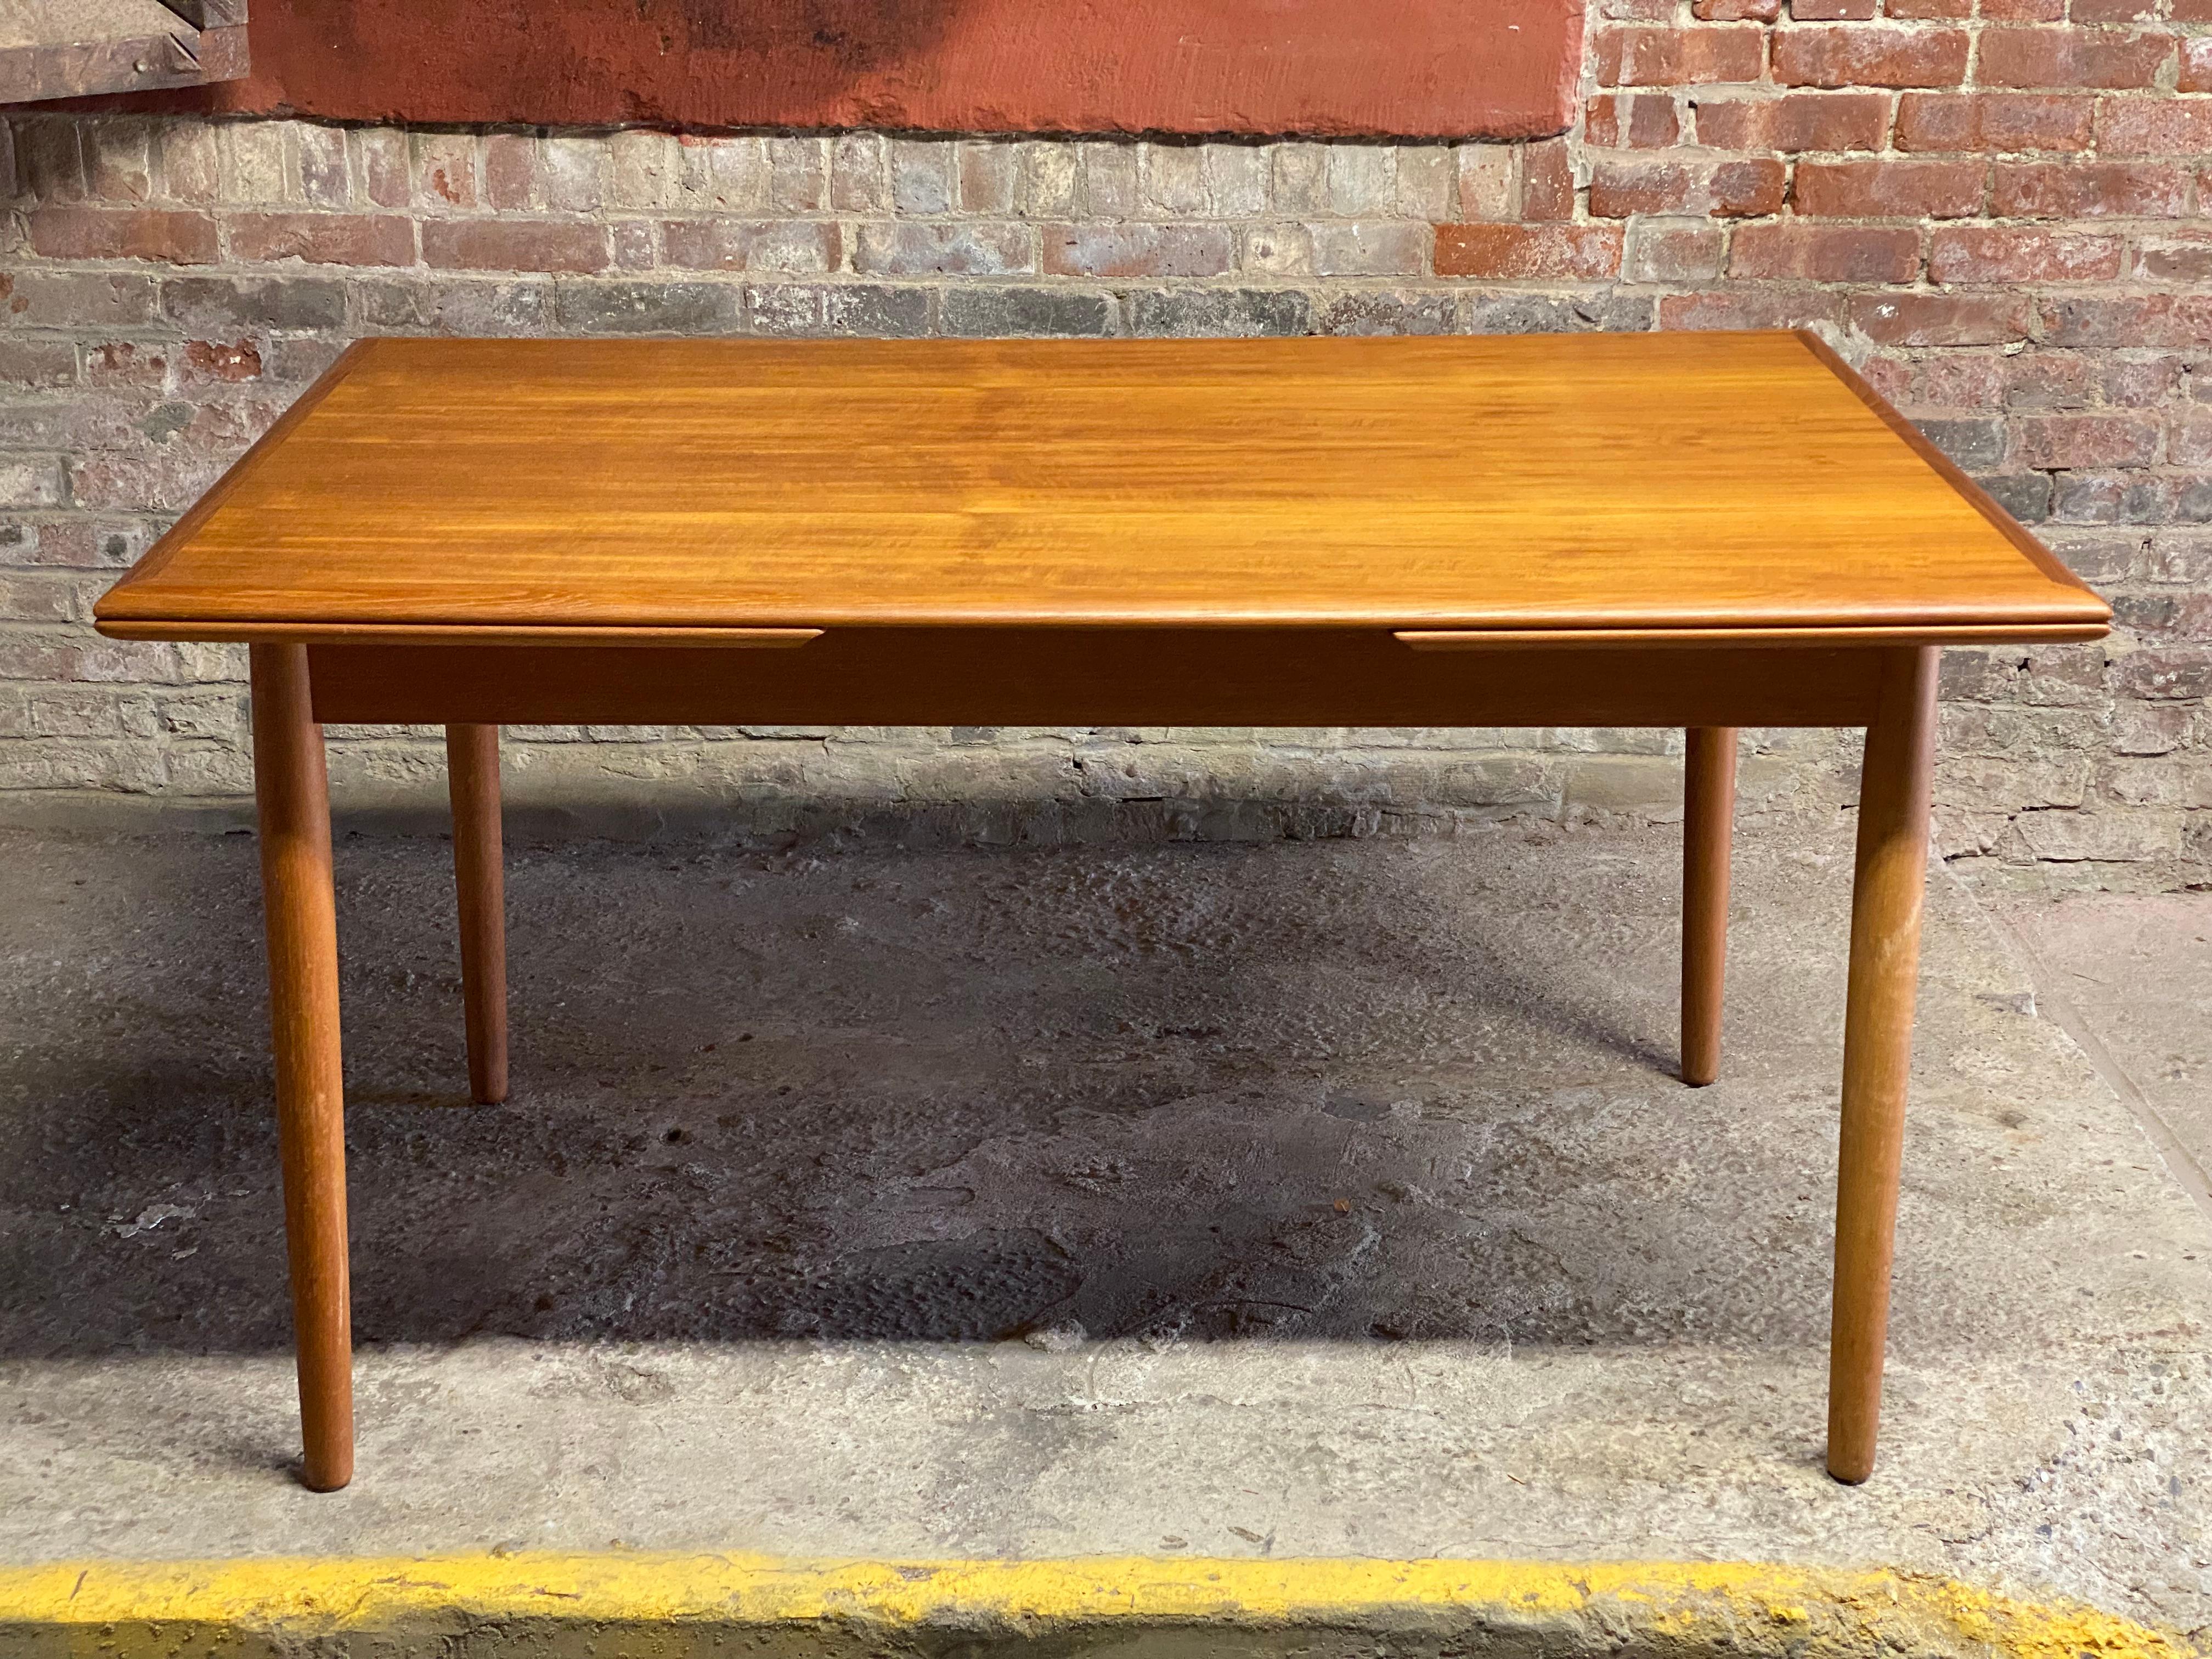 Scandinavian teak dining table. Circa 1960-70. Featuring rectangular top, removable legs for flat pack shipping, two hidden draw leaf extensions, beautifully figured teak veneer top with mitered edge joinery. A wonderful space saving Scandinavian